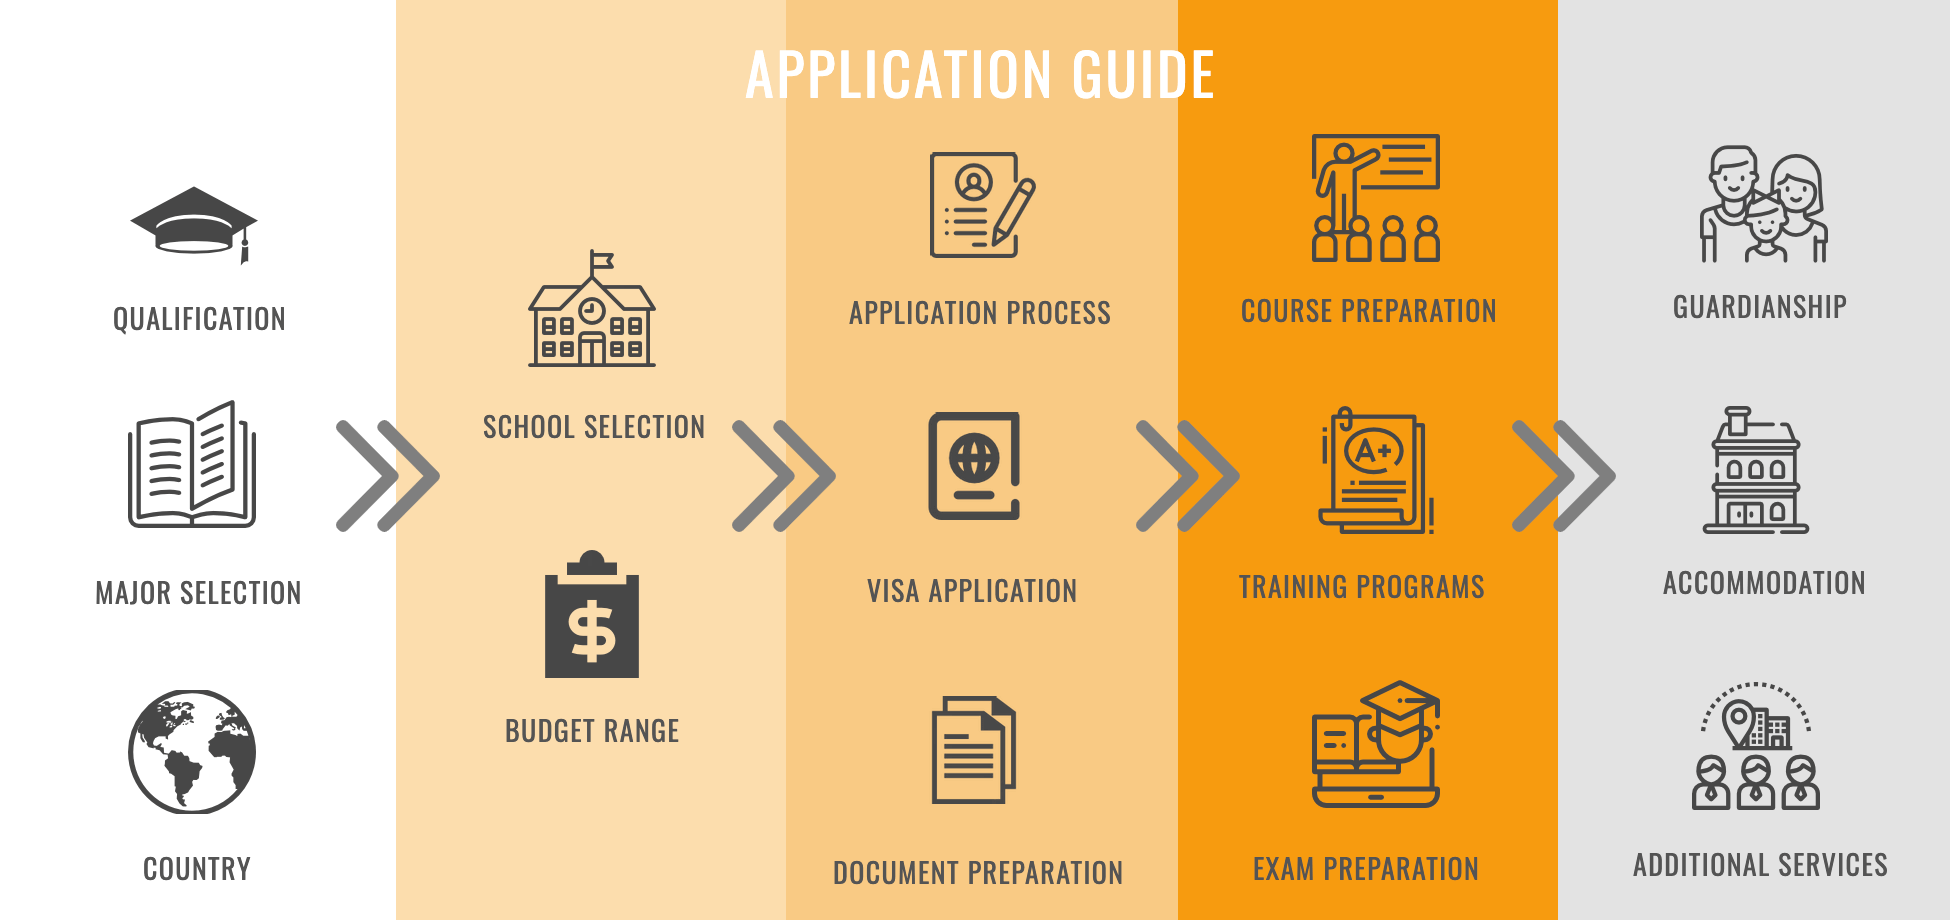 Application guide 9